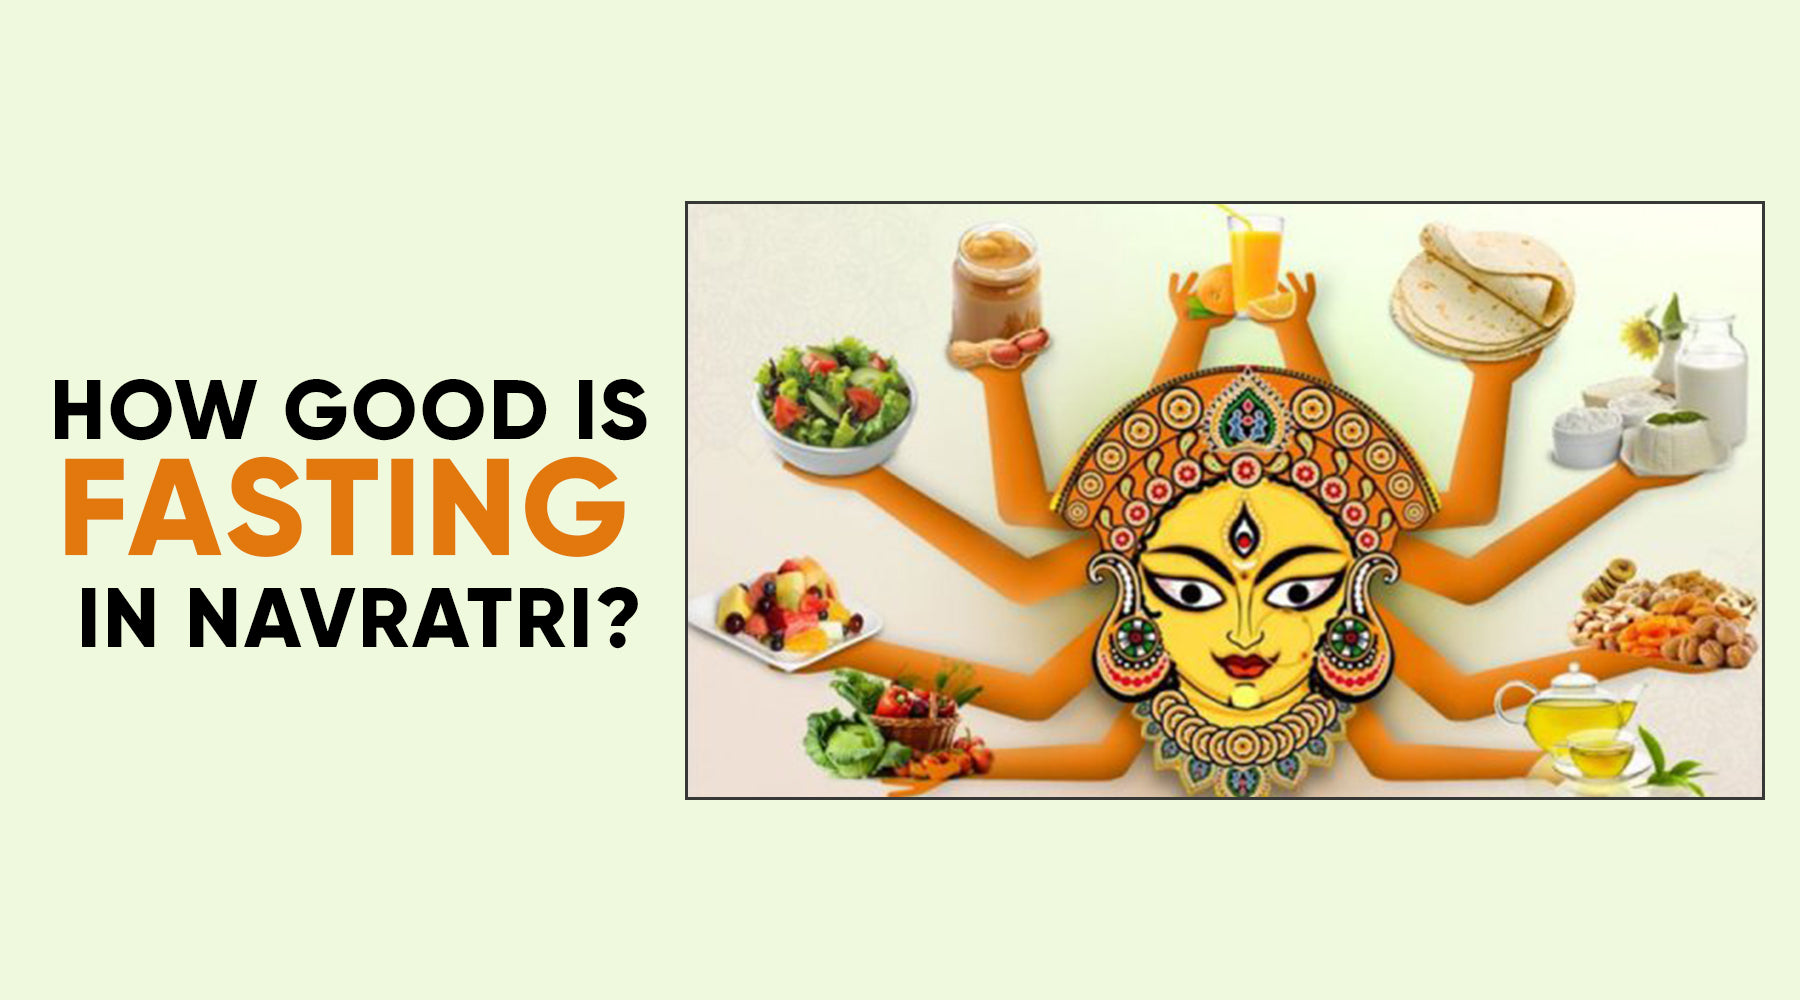 AADAR, AADAR FOR MEN, NAVRATRI, NAVRATRI 2022, 2022, NAVRATRI FASTING, FASTING, FESTIVAL, INDIAN FESTIVAL, FASTING BENEFITS, DETOX, FASTING DISHES